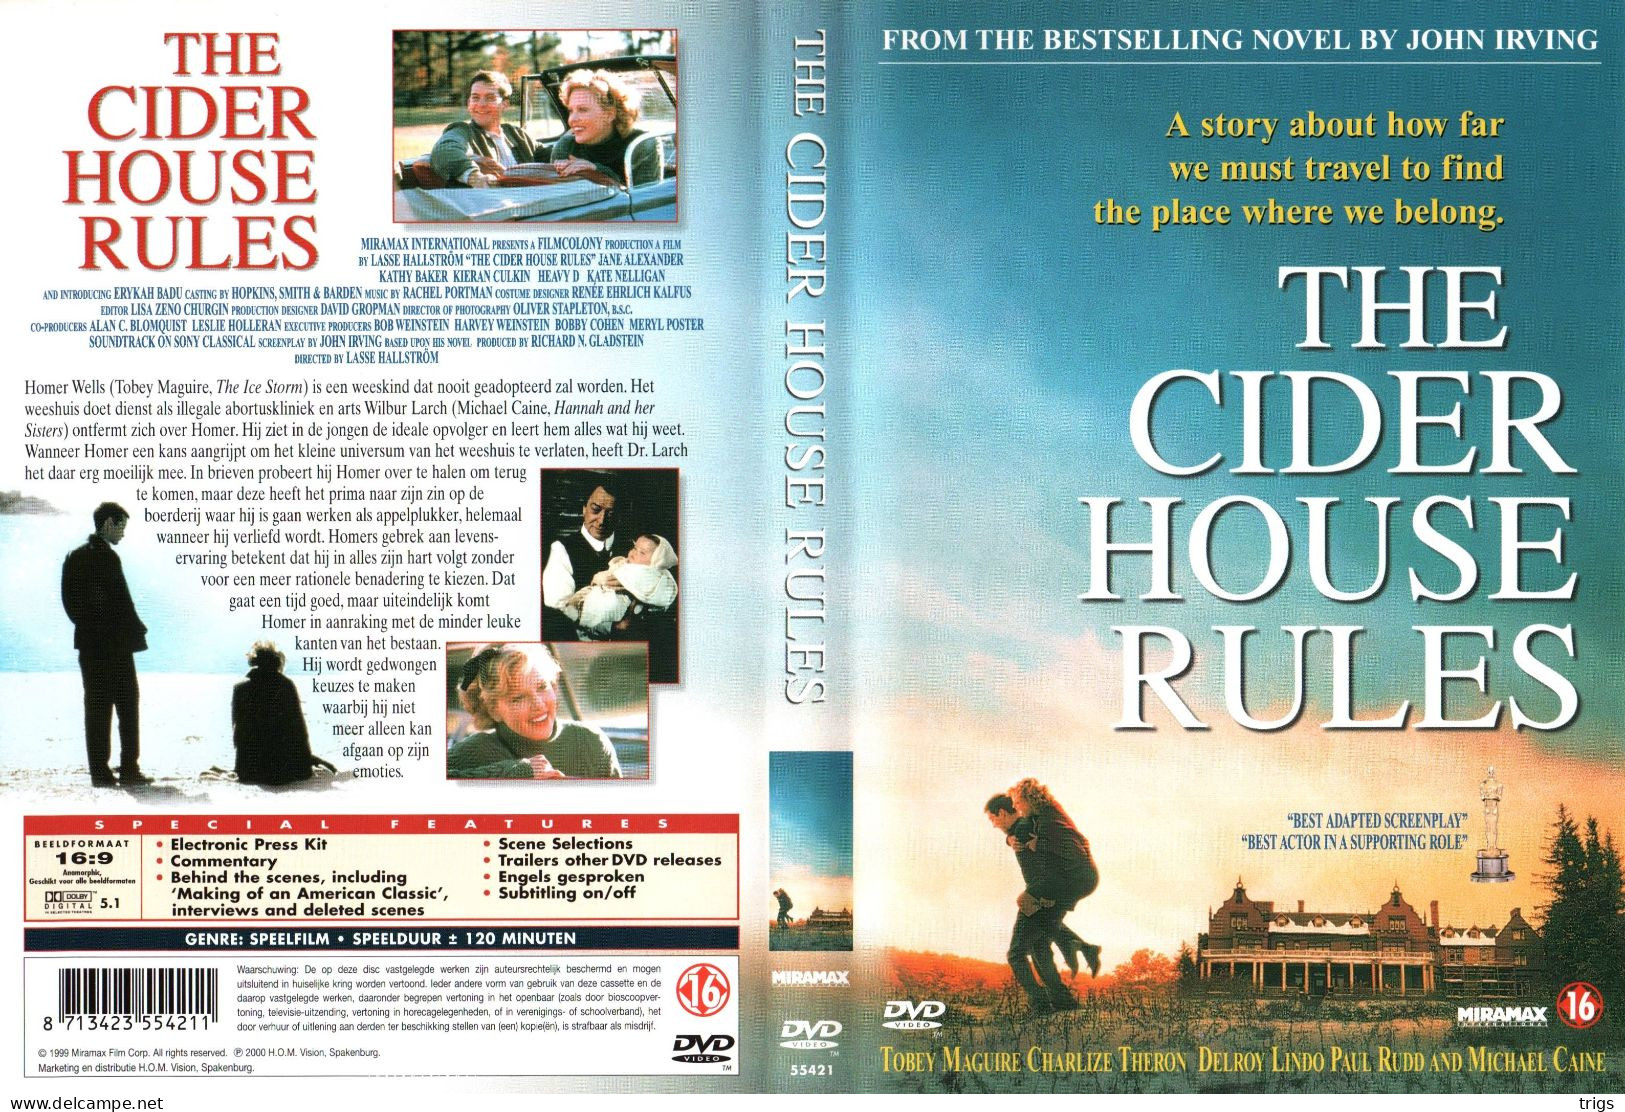 DVD - The Cider House Rules - Drama